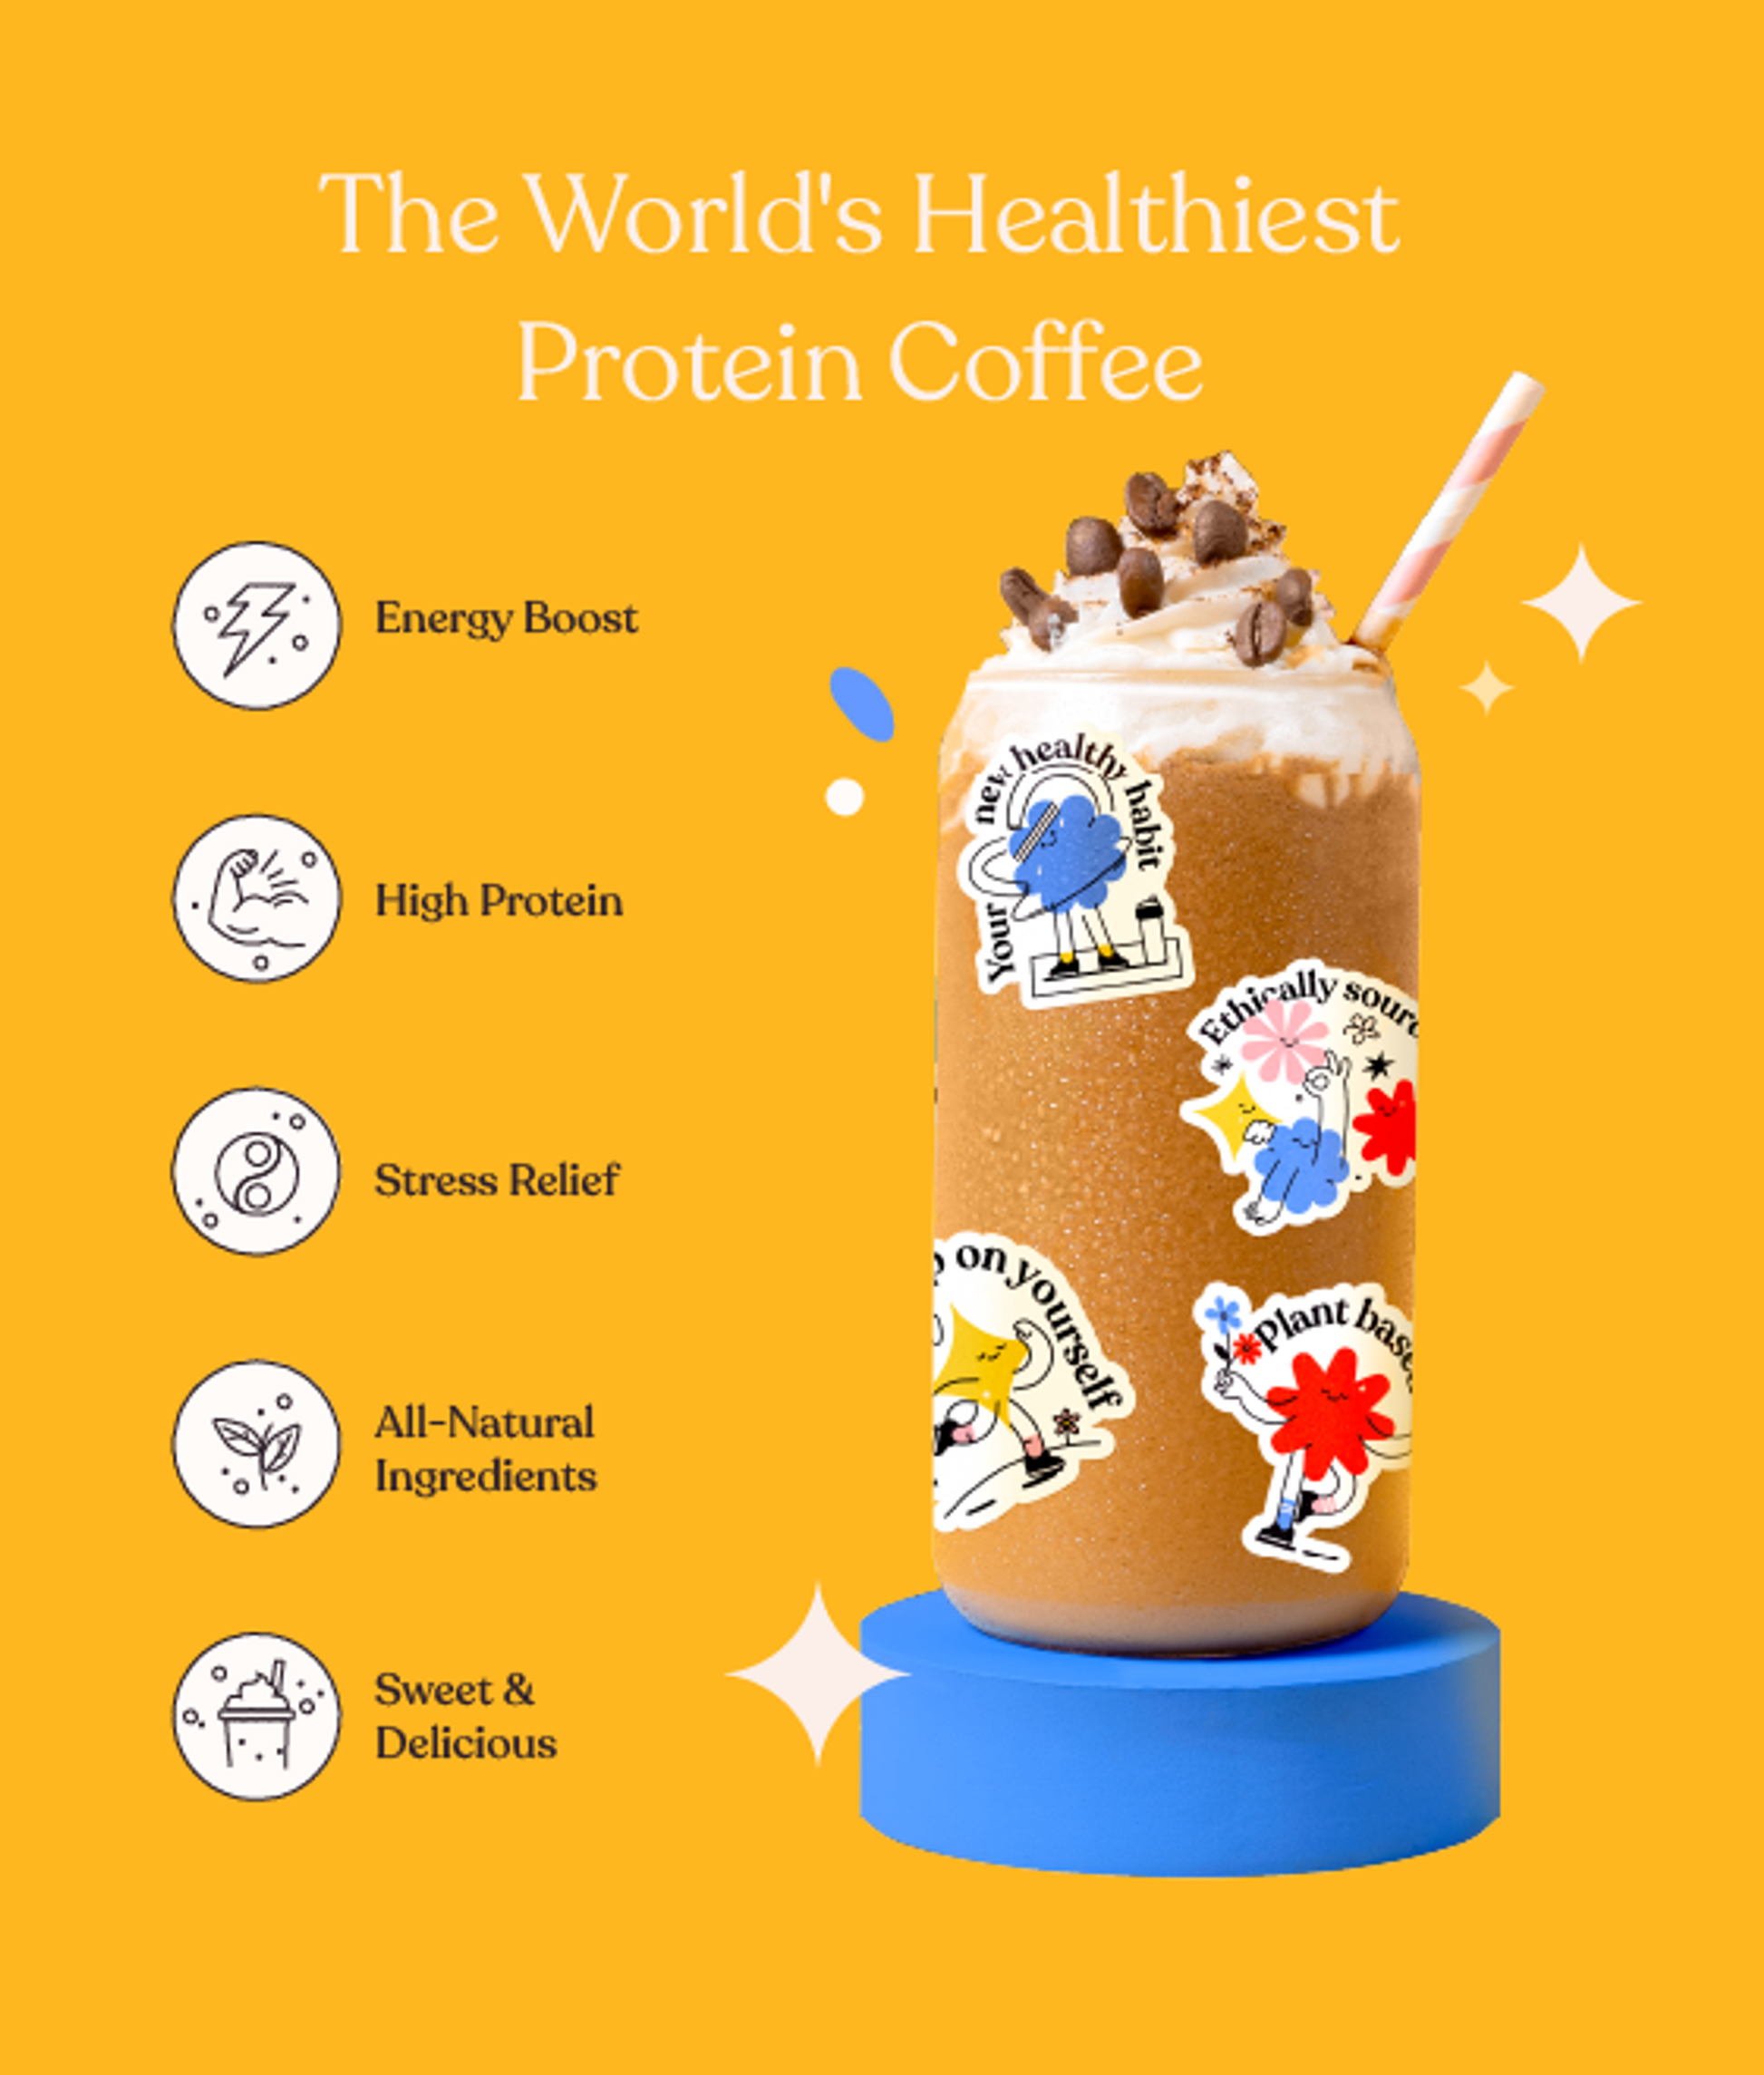 The World's Healthiest Protein Coffee